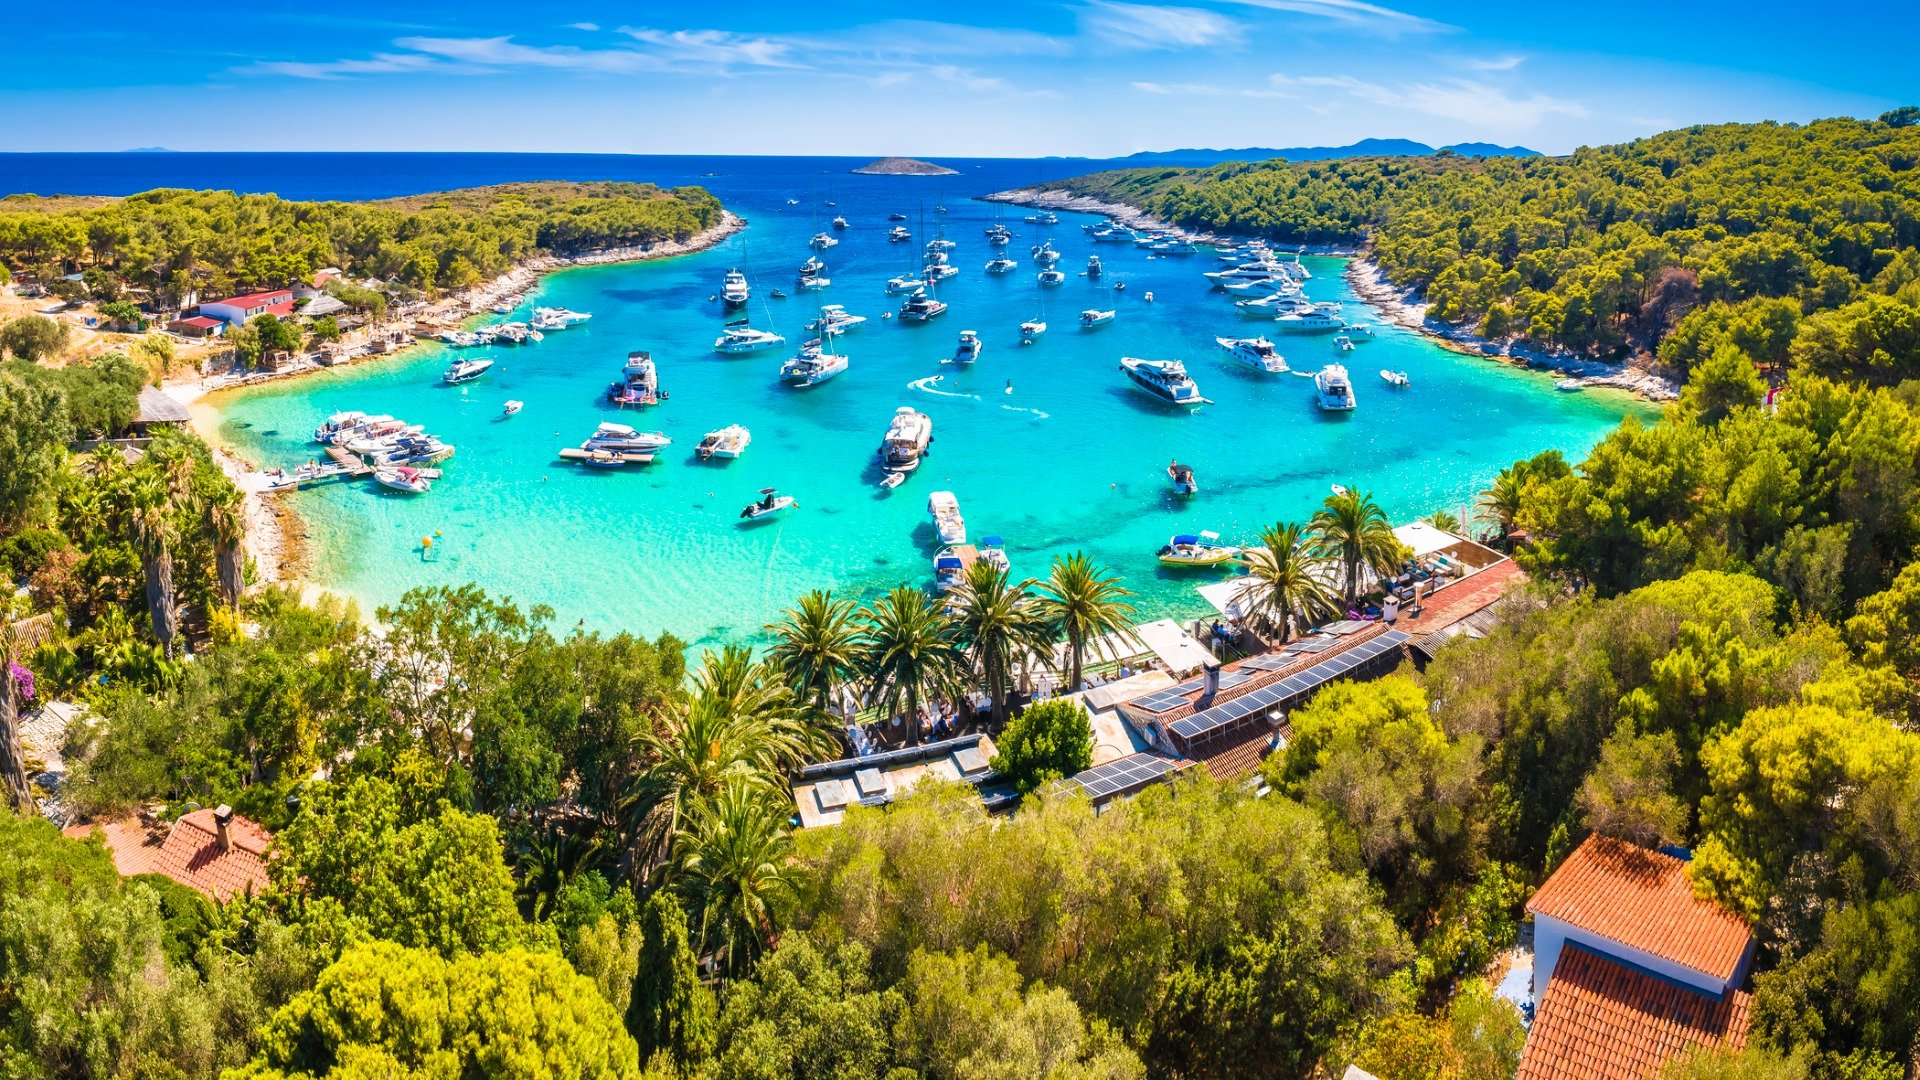 This is a panoramic shot of Palmizana, one of the best beaches in Hvar. There are many yachts floating on transparent turquoise waters.